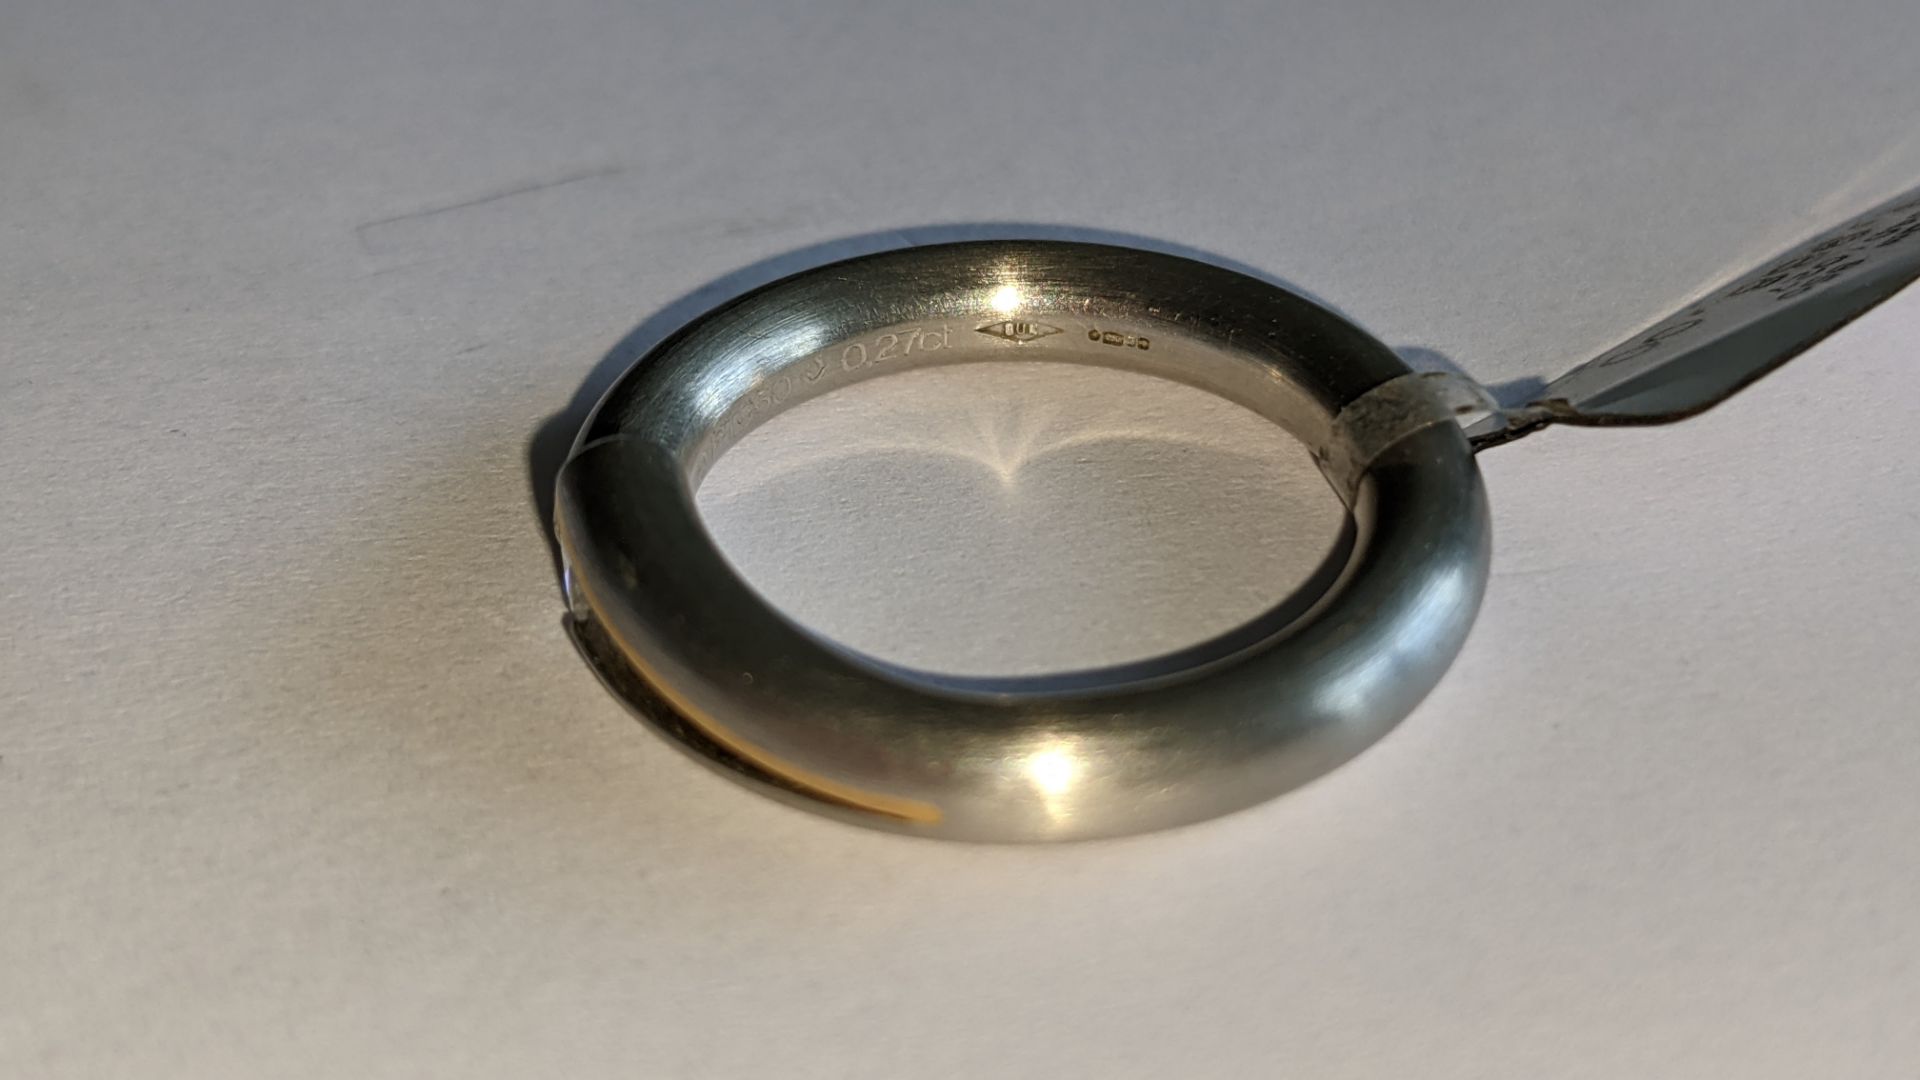 Platinum 950 ring with central diamond weighing 0.27ct & rose gold finish to small area of the mount - Image 11 of 15